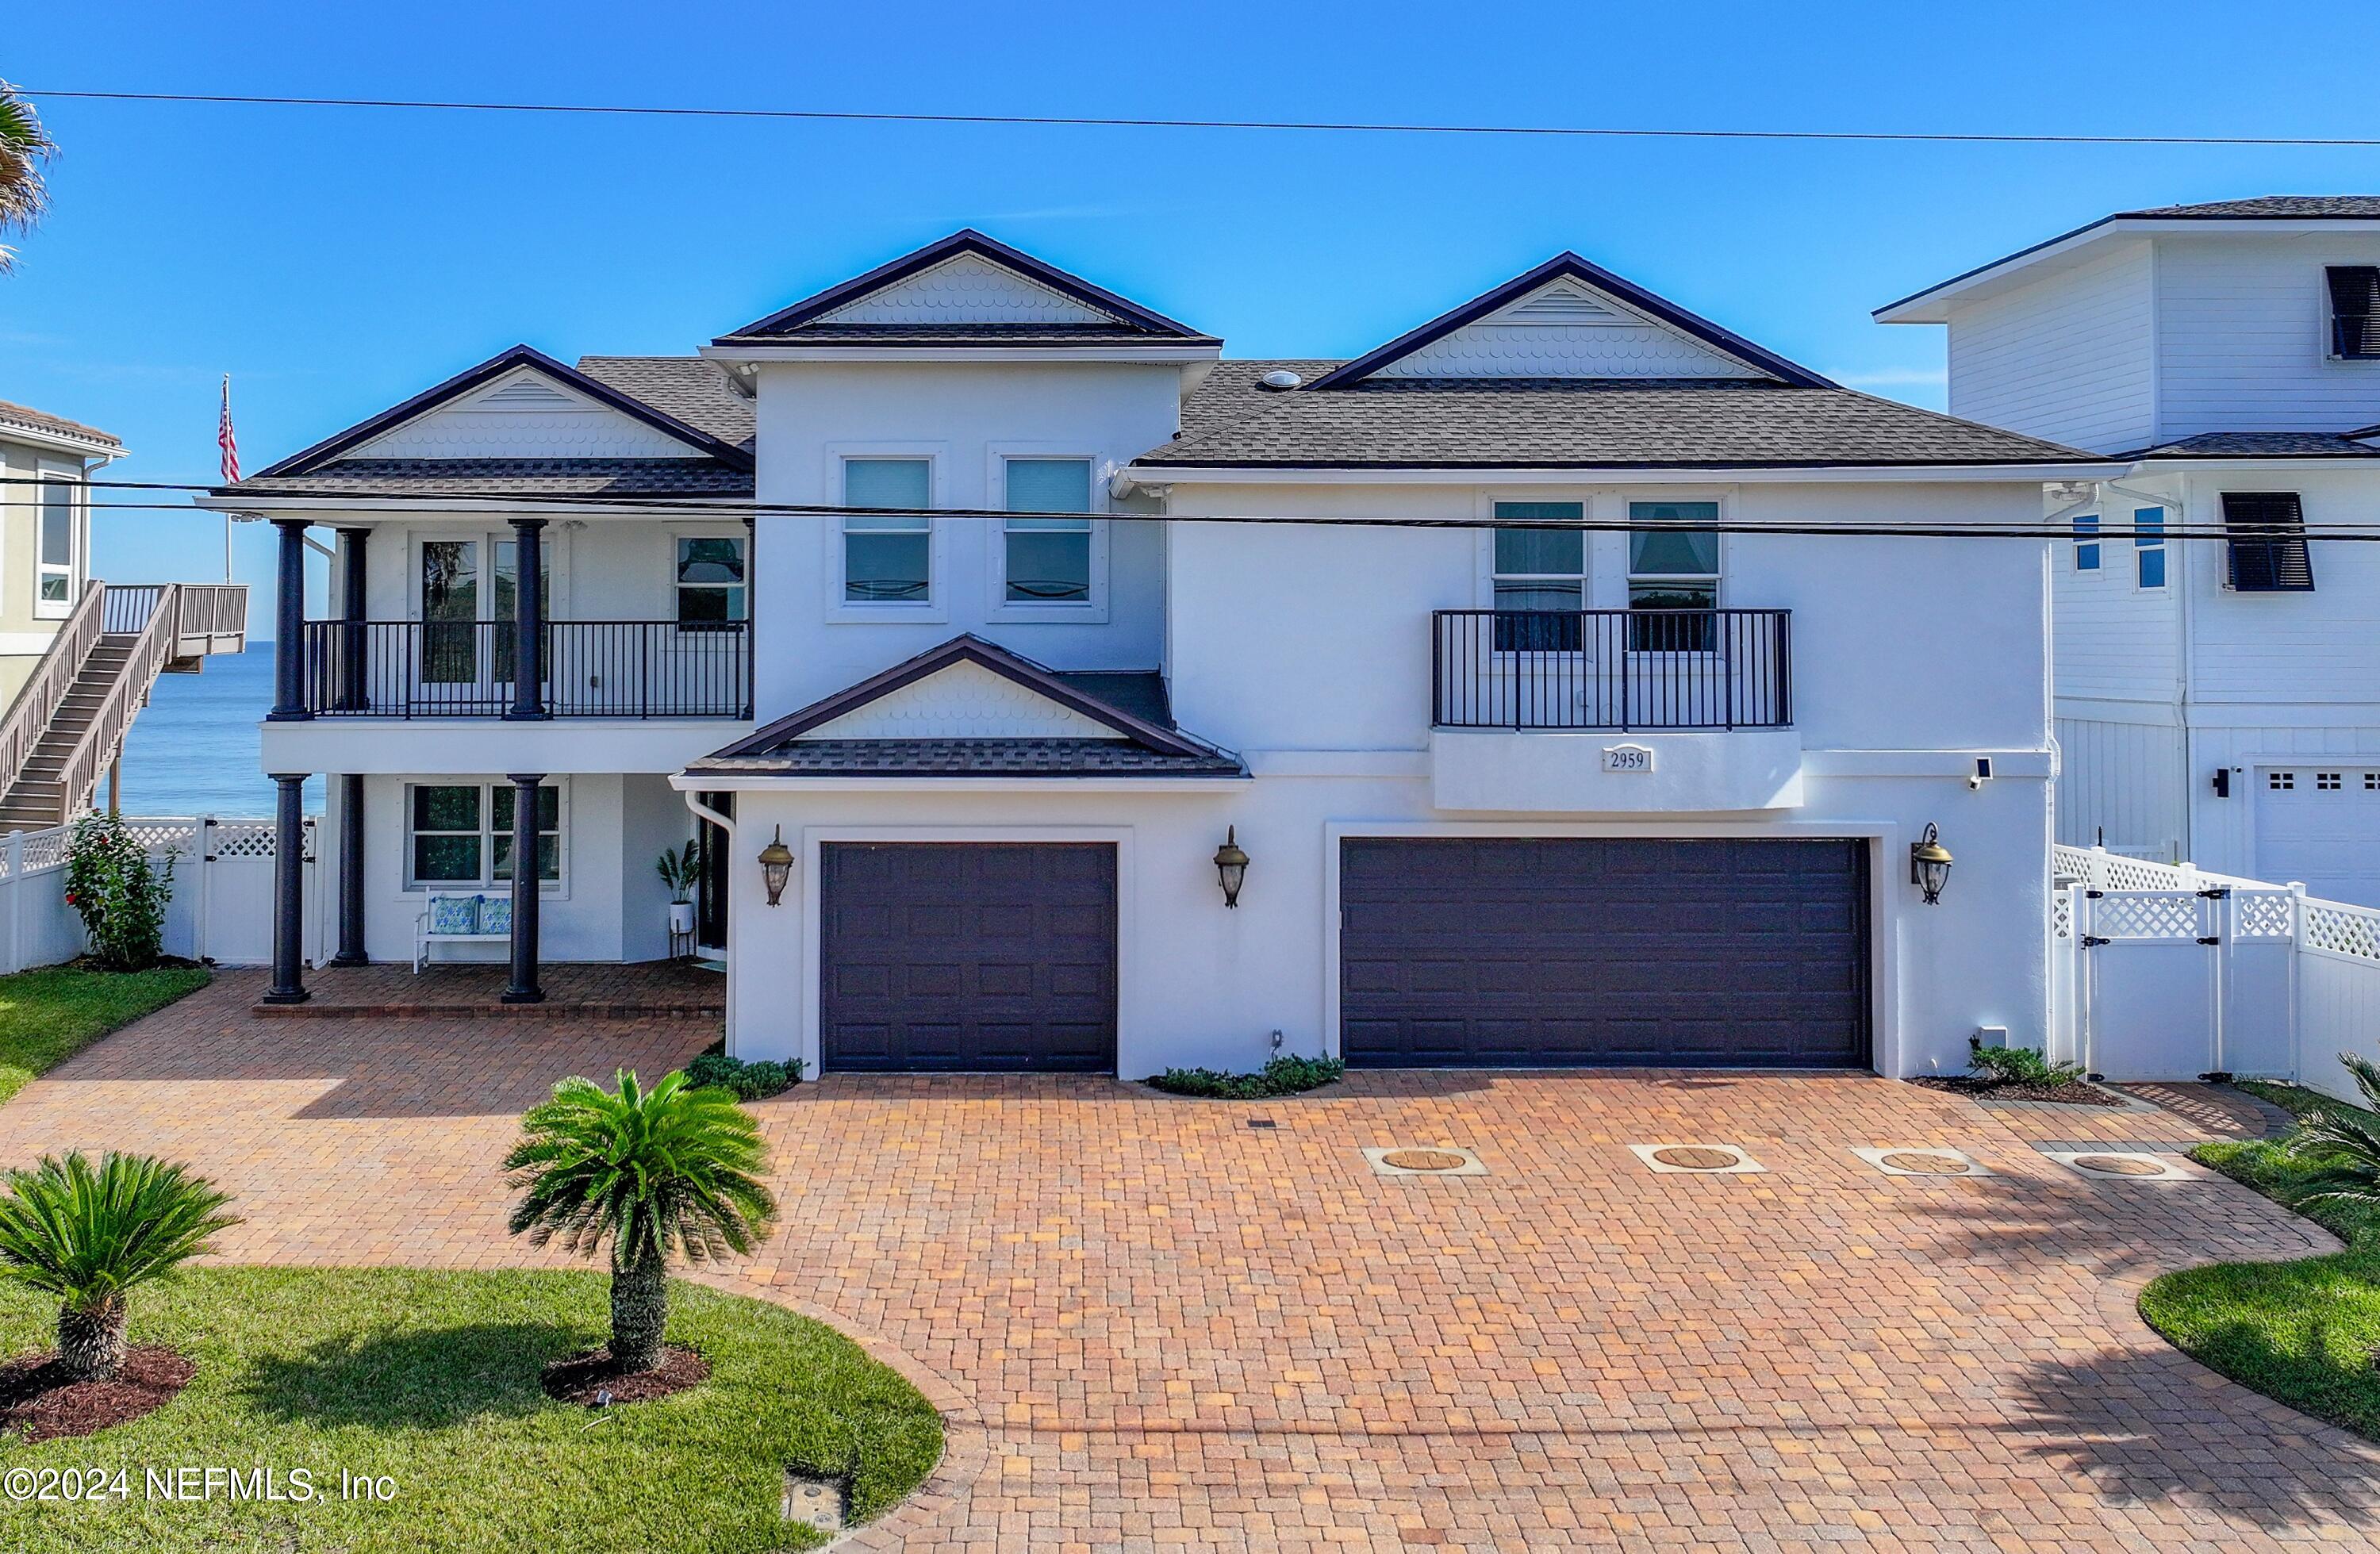 Ponte Vedra Beach, FL home for sale located at 2959 S Ponte Vedra Boulevard, Ponte Vedra Beach, FL 32082